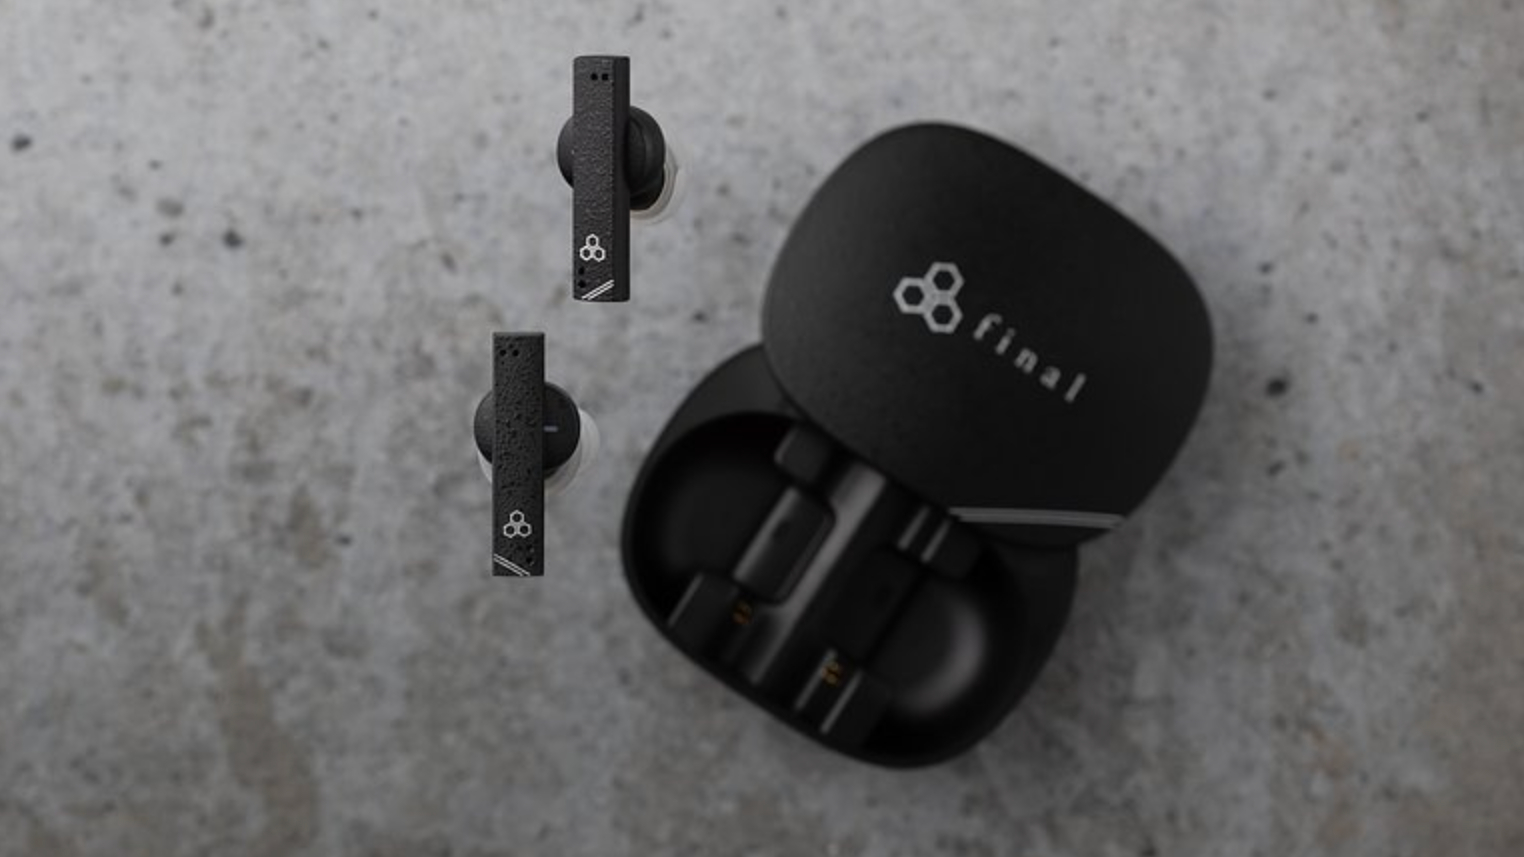 Final Audio ZE8000 MK2 earbuds and case on gray stone background